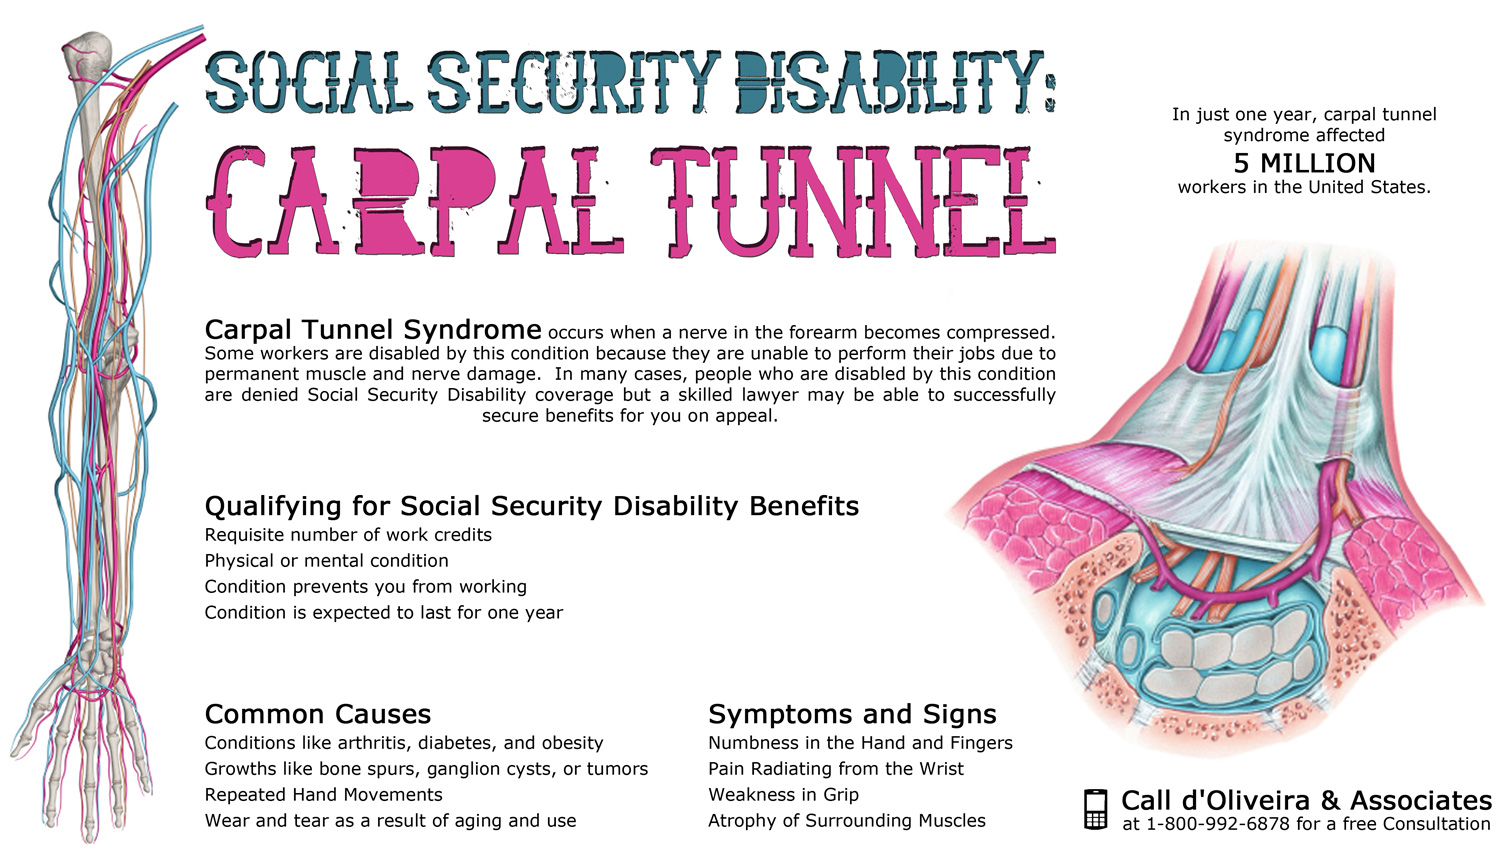 Social Security Disability with Carpal Tunnel Syndrome Infographic